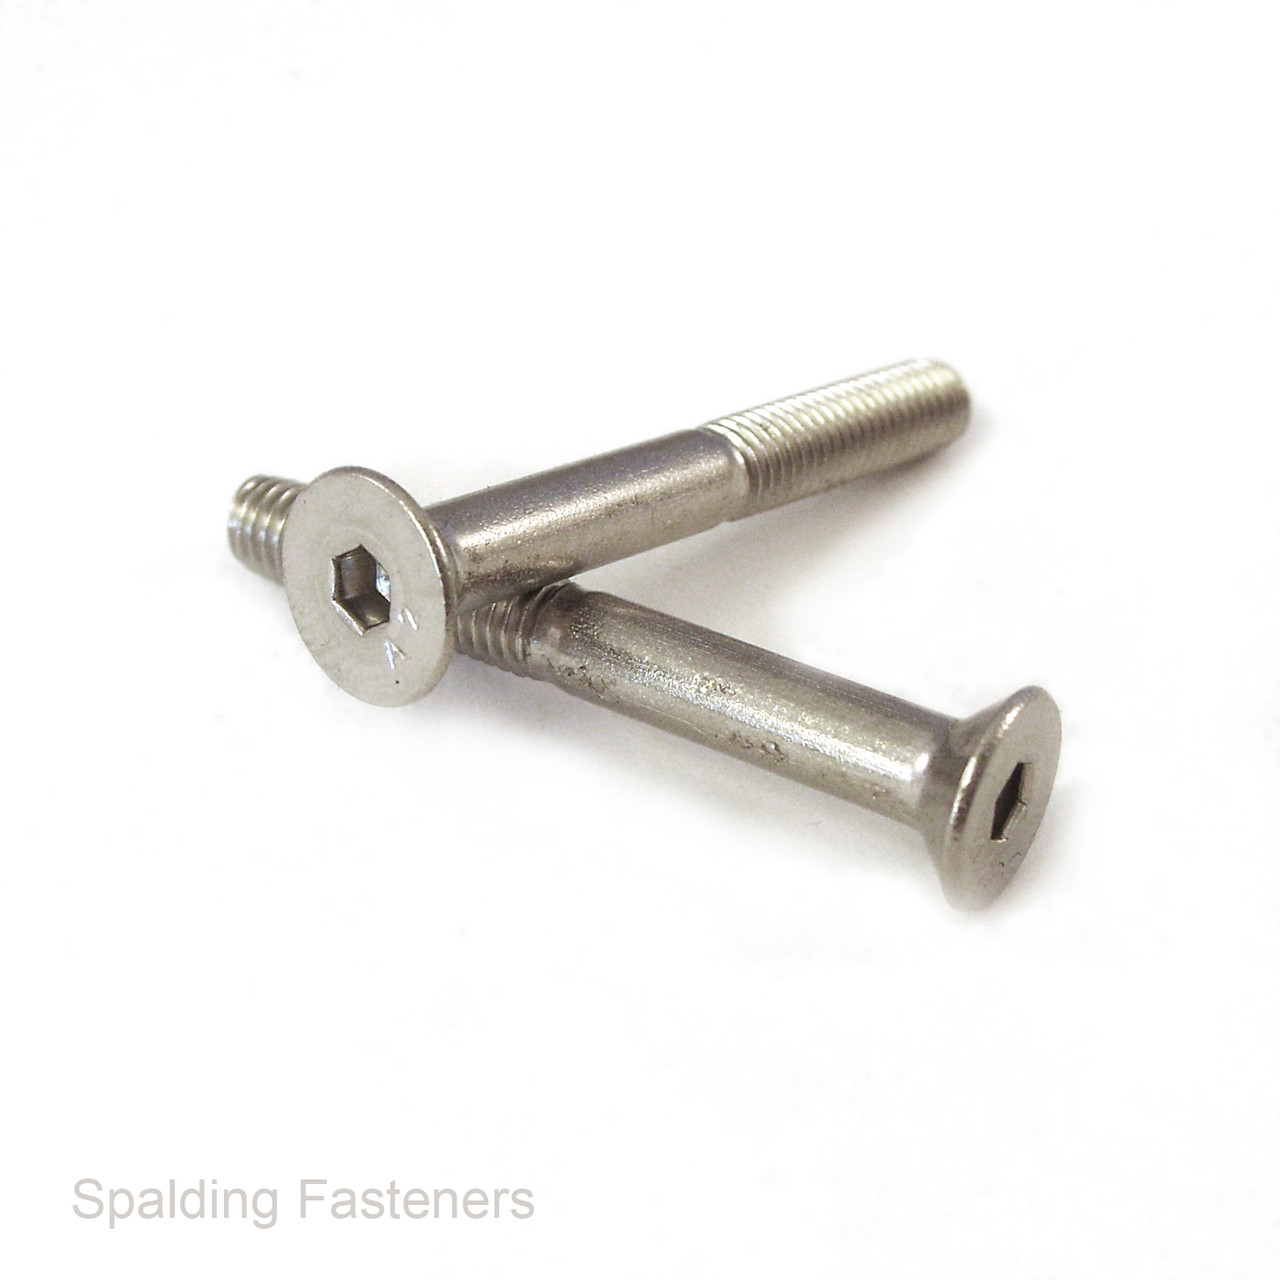 Metric A2 Grade Stainless Steel Countersunk Socket Bolts With Shank